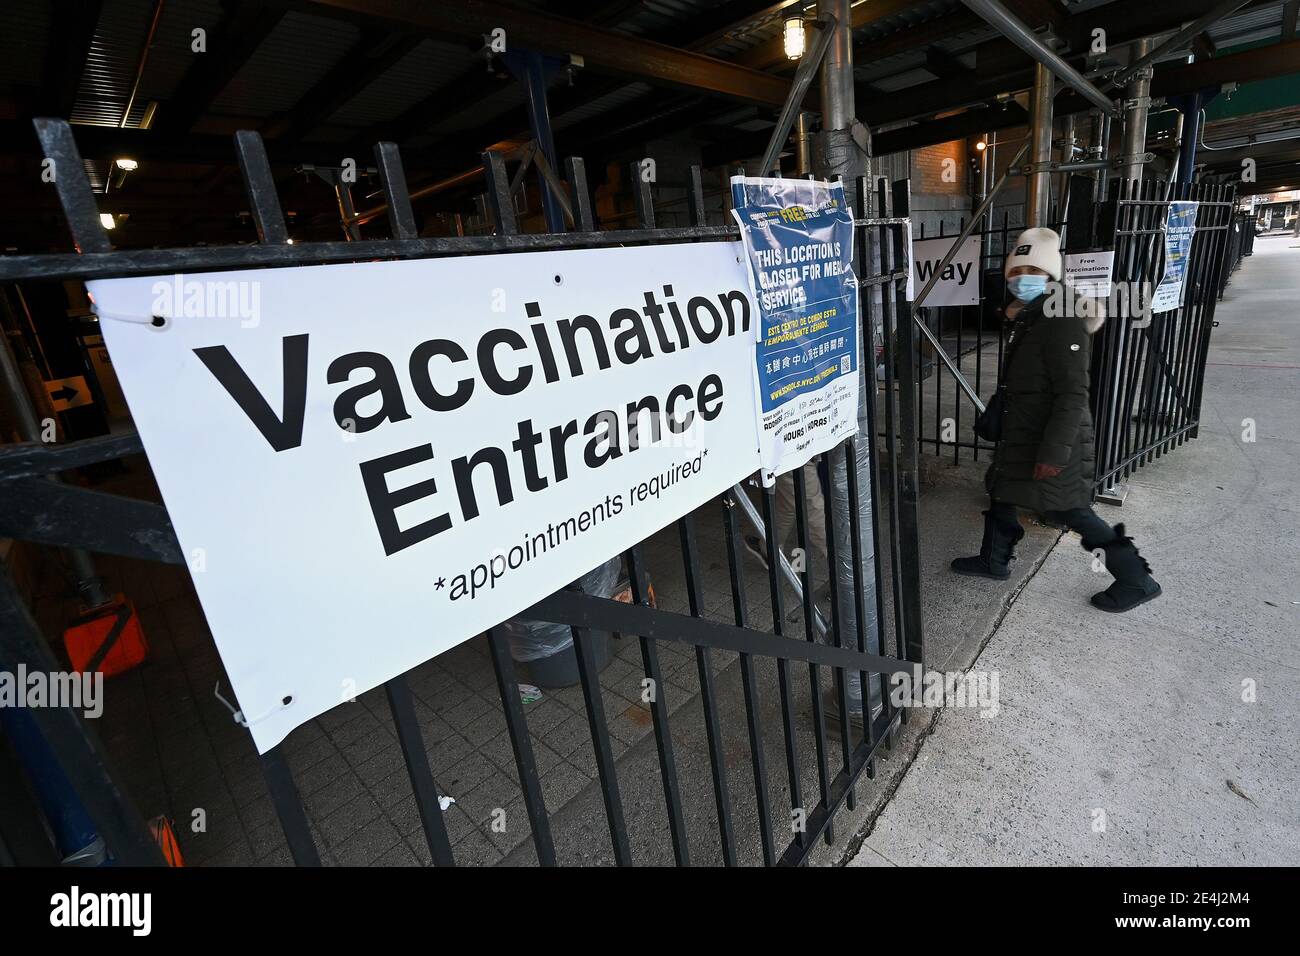 A woman enters a COVID-19 Vaccination Hub in the Elmhurst section of the Queens borough of New York City, NY, January 23, 2021. New York City has ordered 15 if its COVID-19 Vaccinations hubs closed and appointments cancelled due to a shortage of the COVID-19 vaccine; the United States recently surpassed 400,000 deaths due to Coronavirus infections.  (Photo by Anthony Behar/Sipa USA) Stock Photo